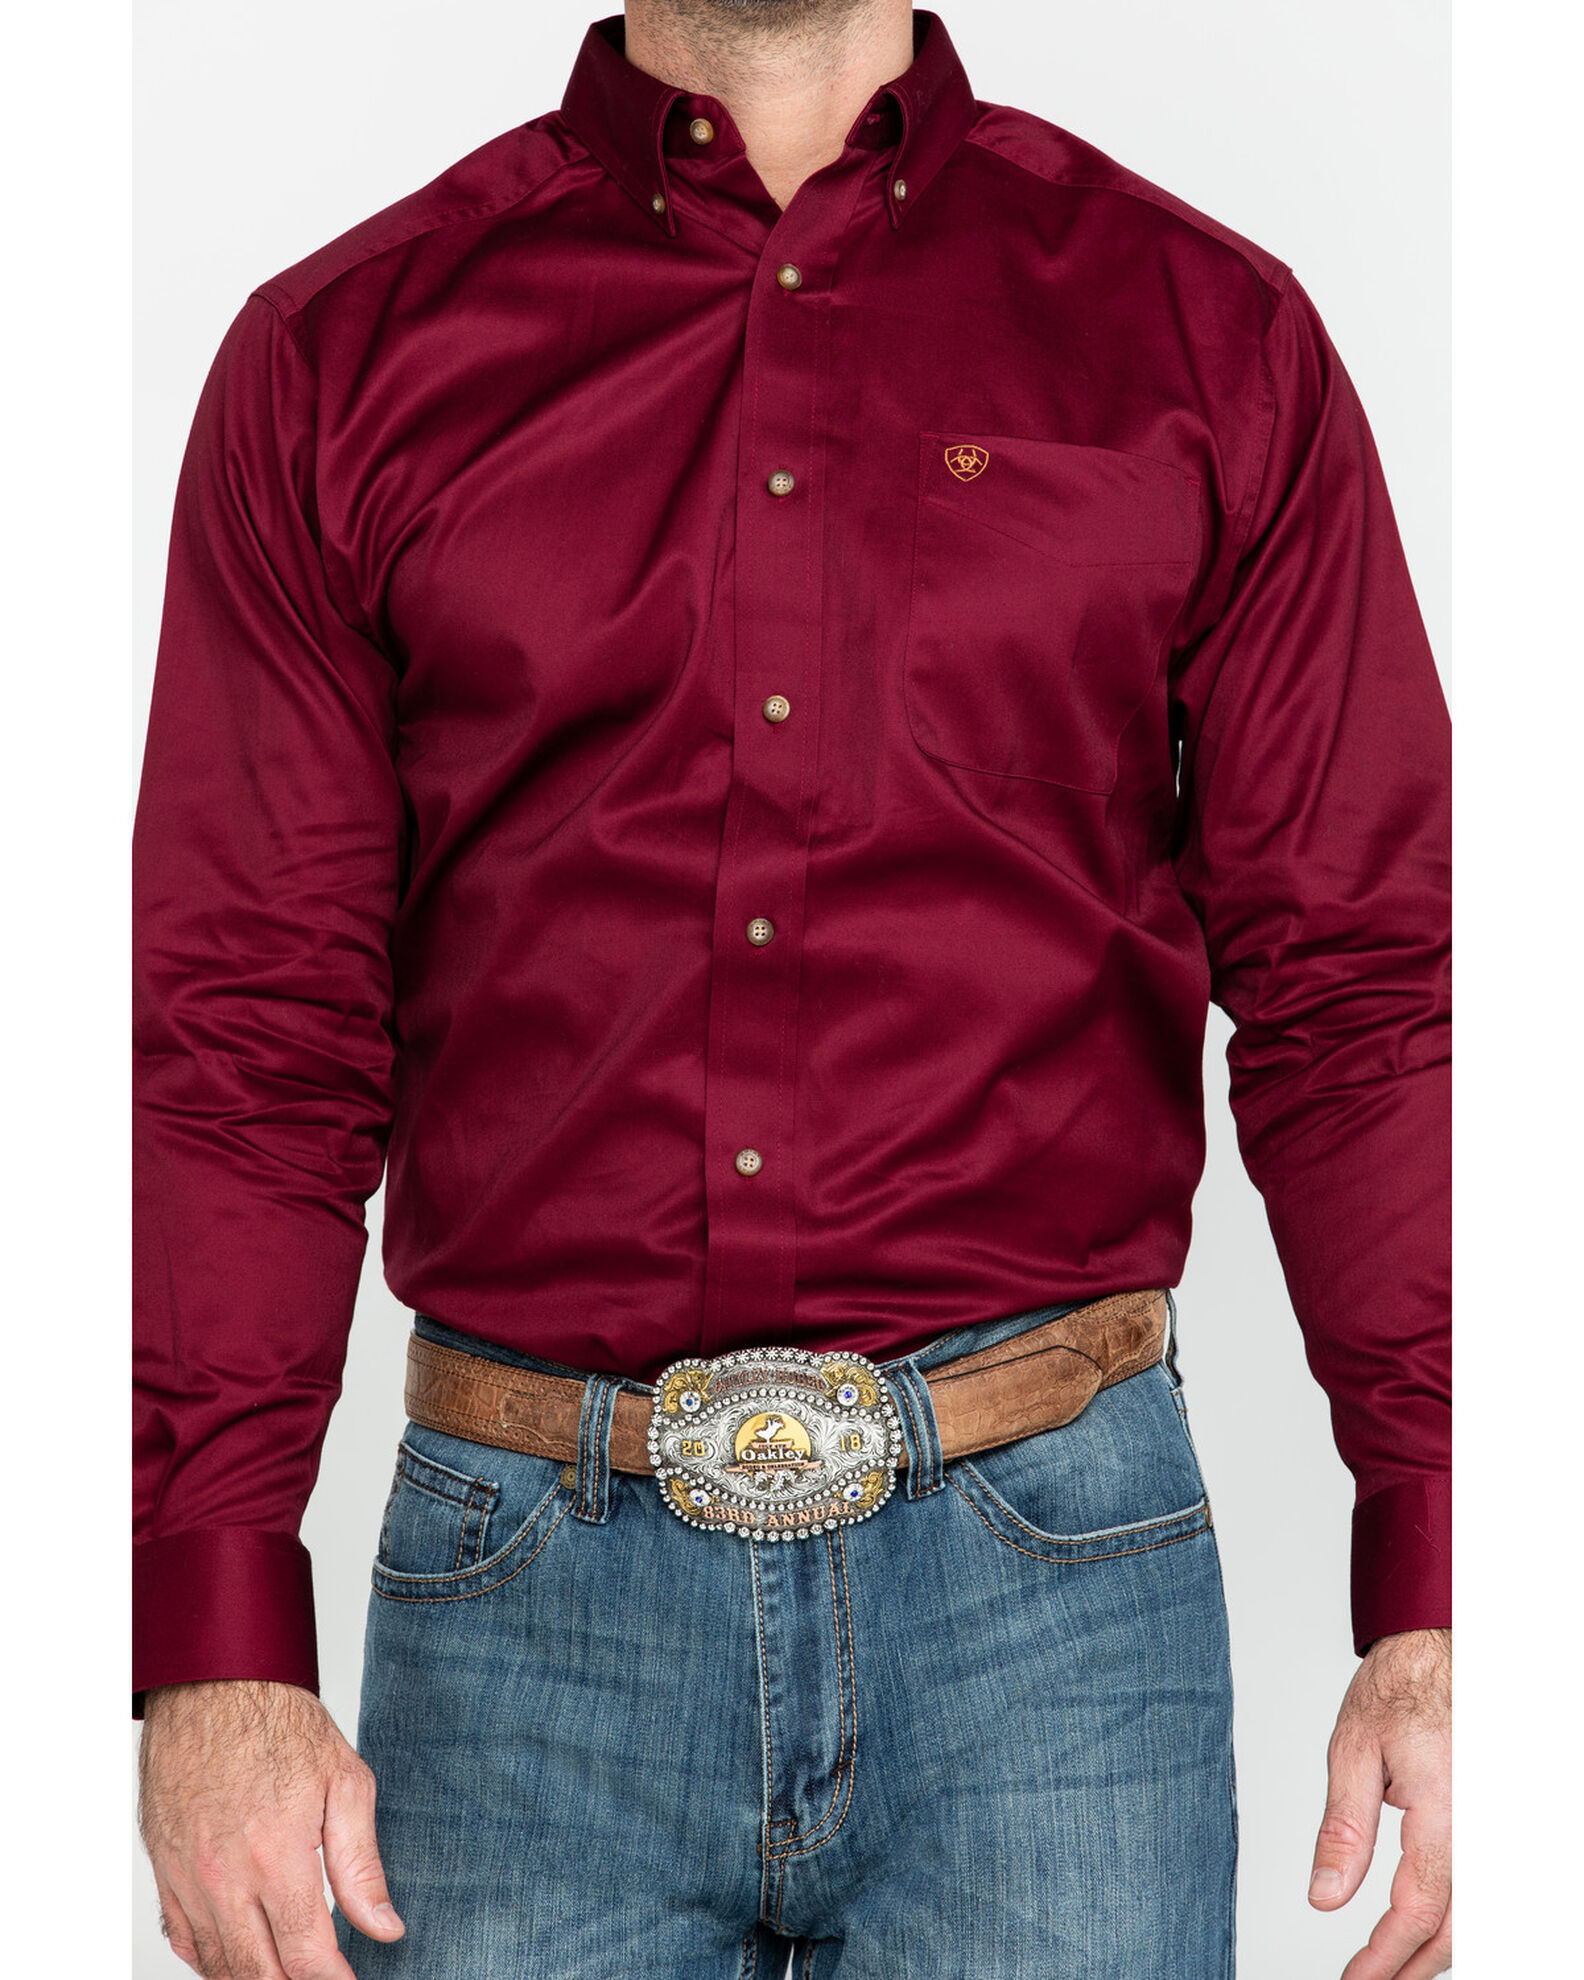 Product Name: Ariat Men's Burgundy Solid Twill Long Sleeve Western Shirt